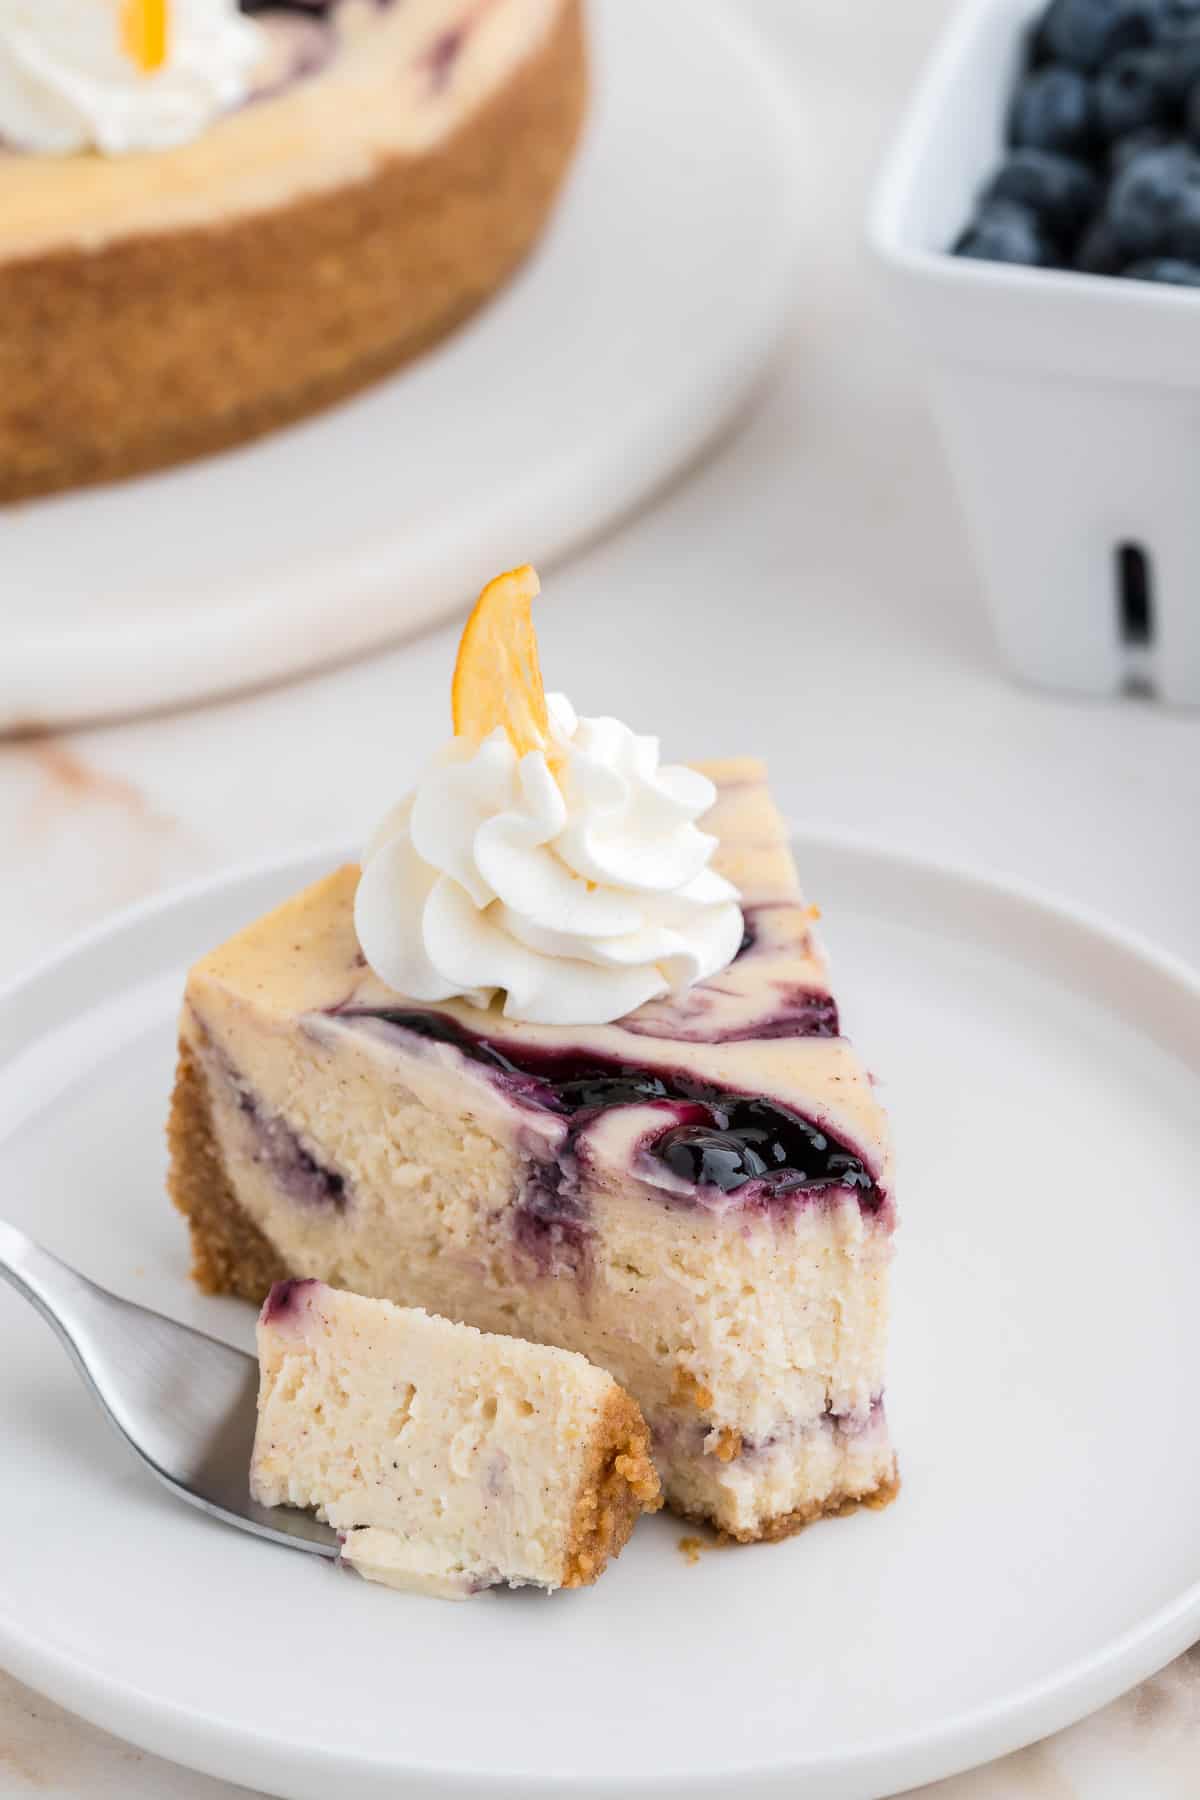 A slice of lemon blueberry cheesecake with a bite taken out.